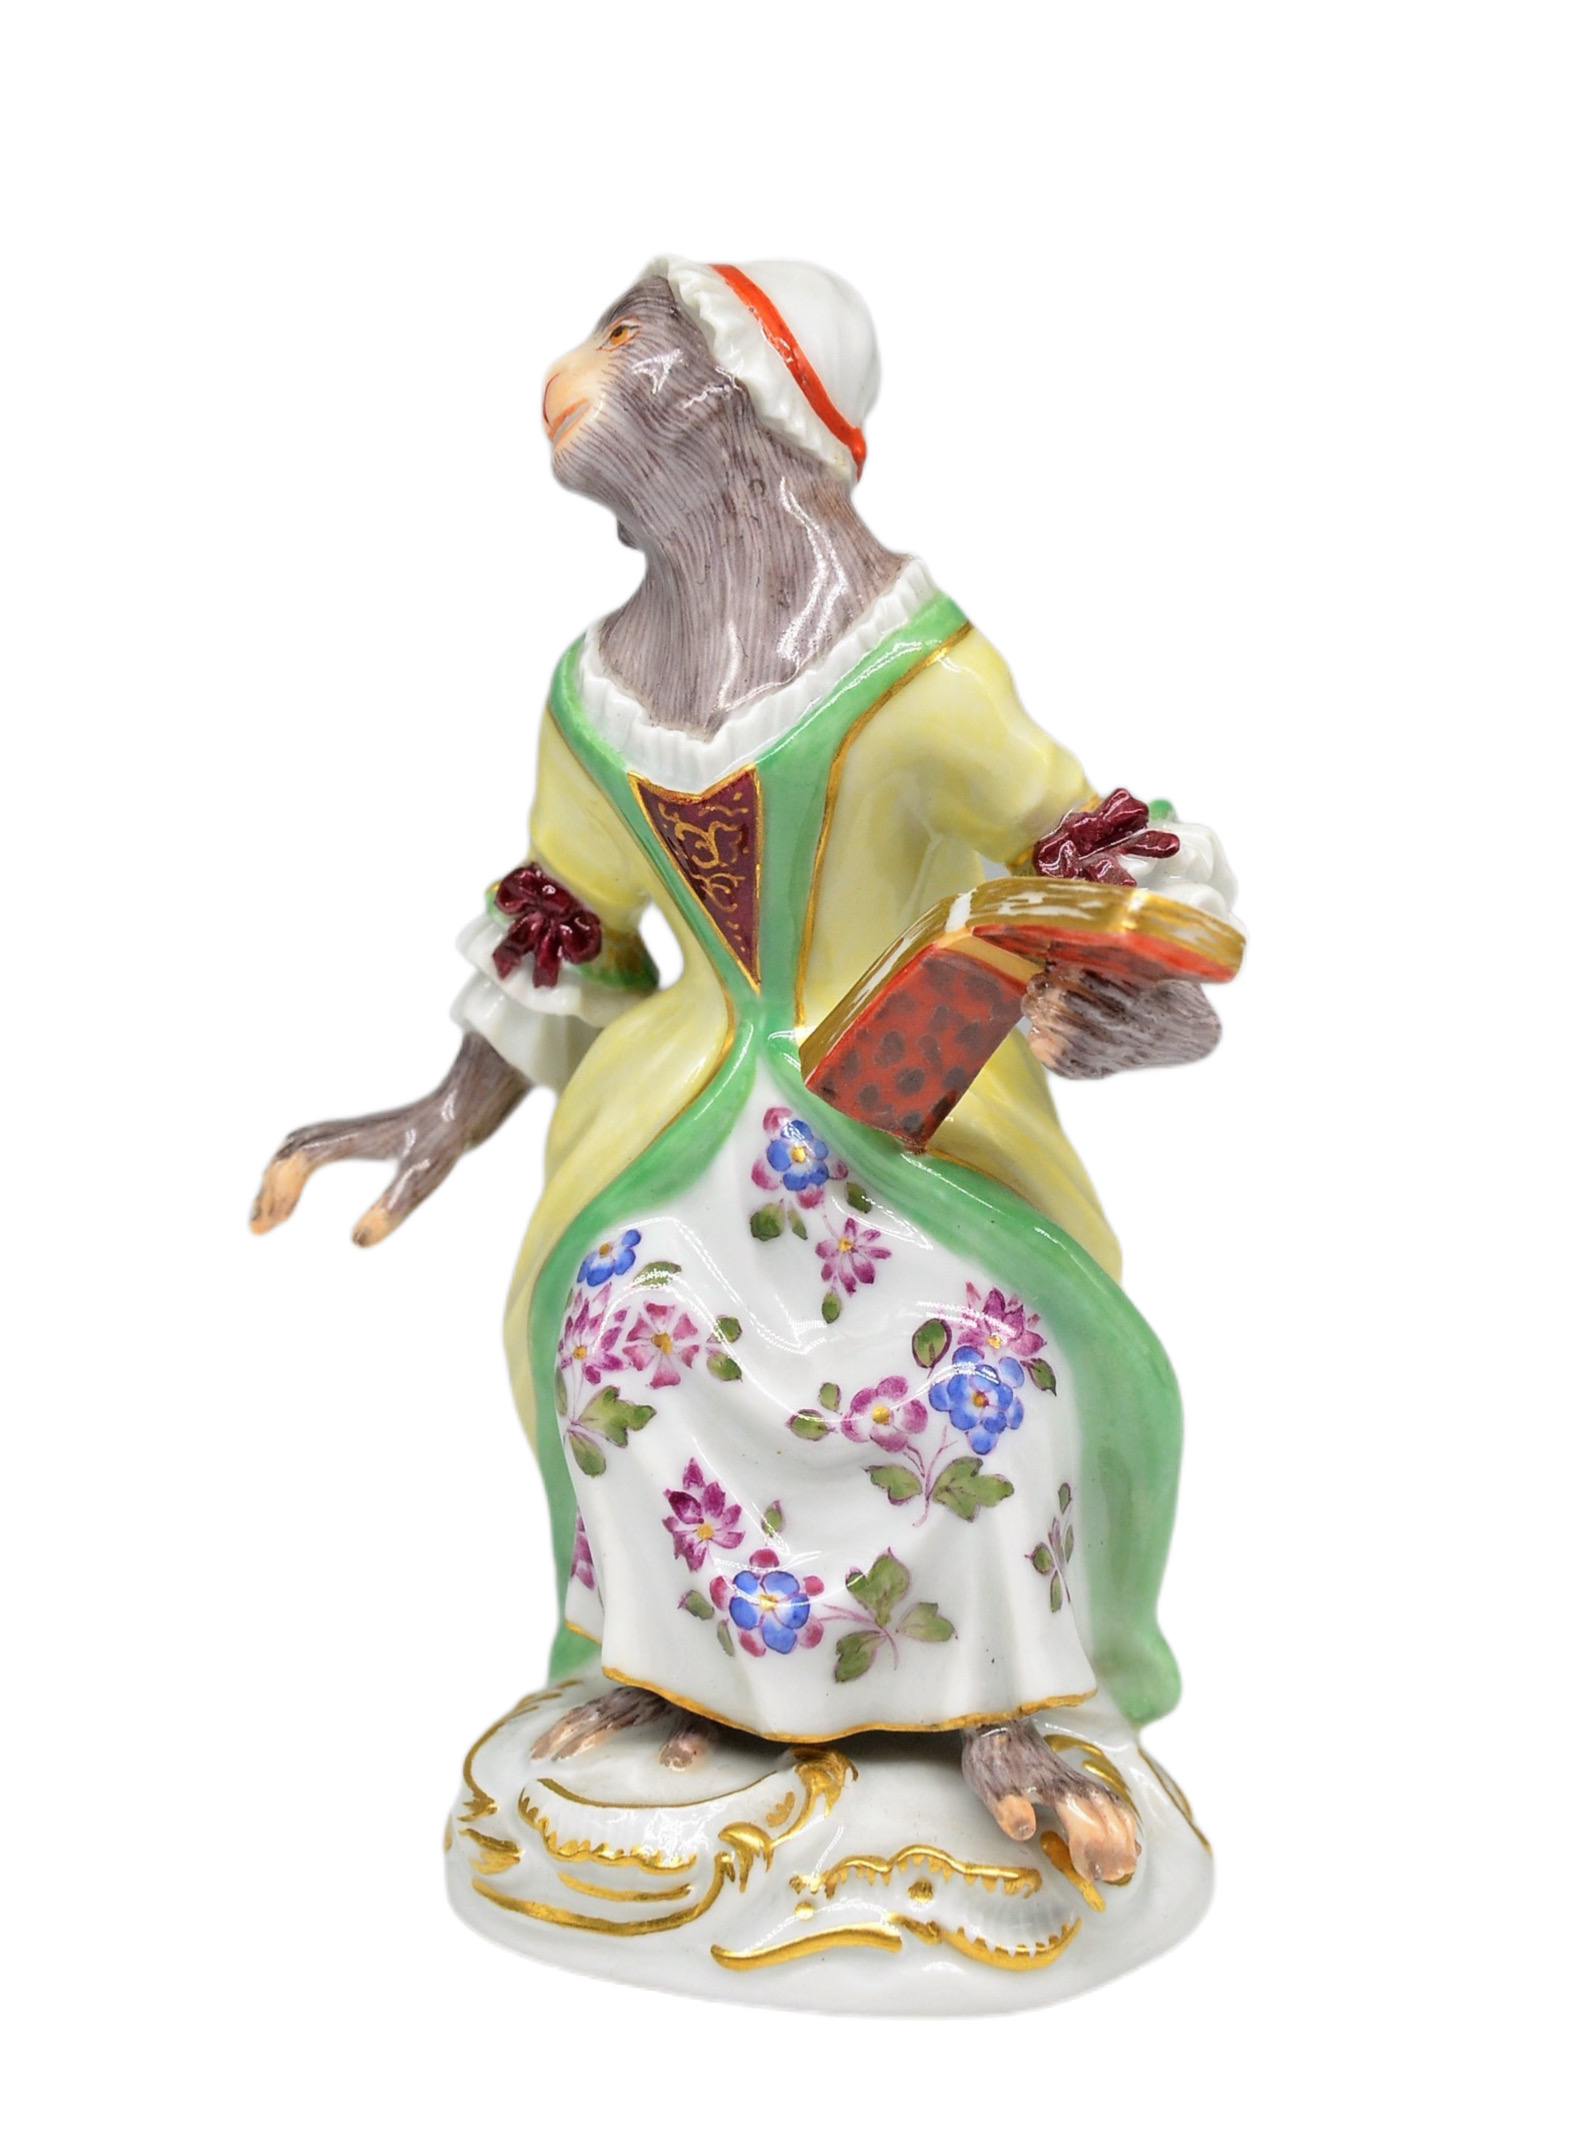 'Singer' figurine from 'Monkey Orchestra' 0